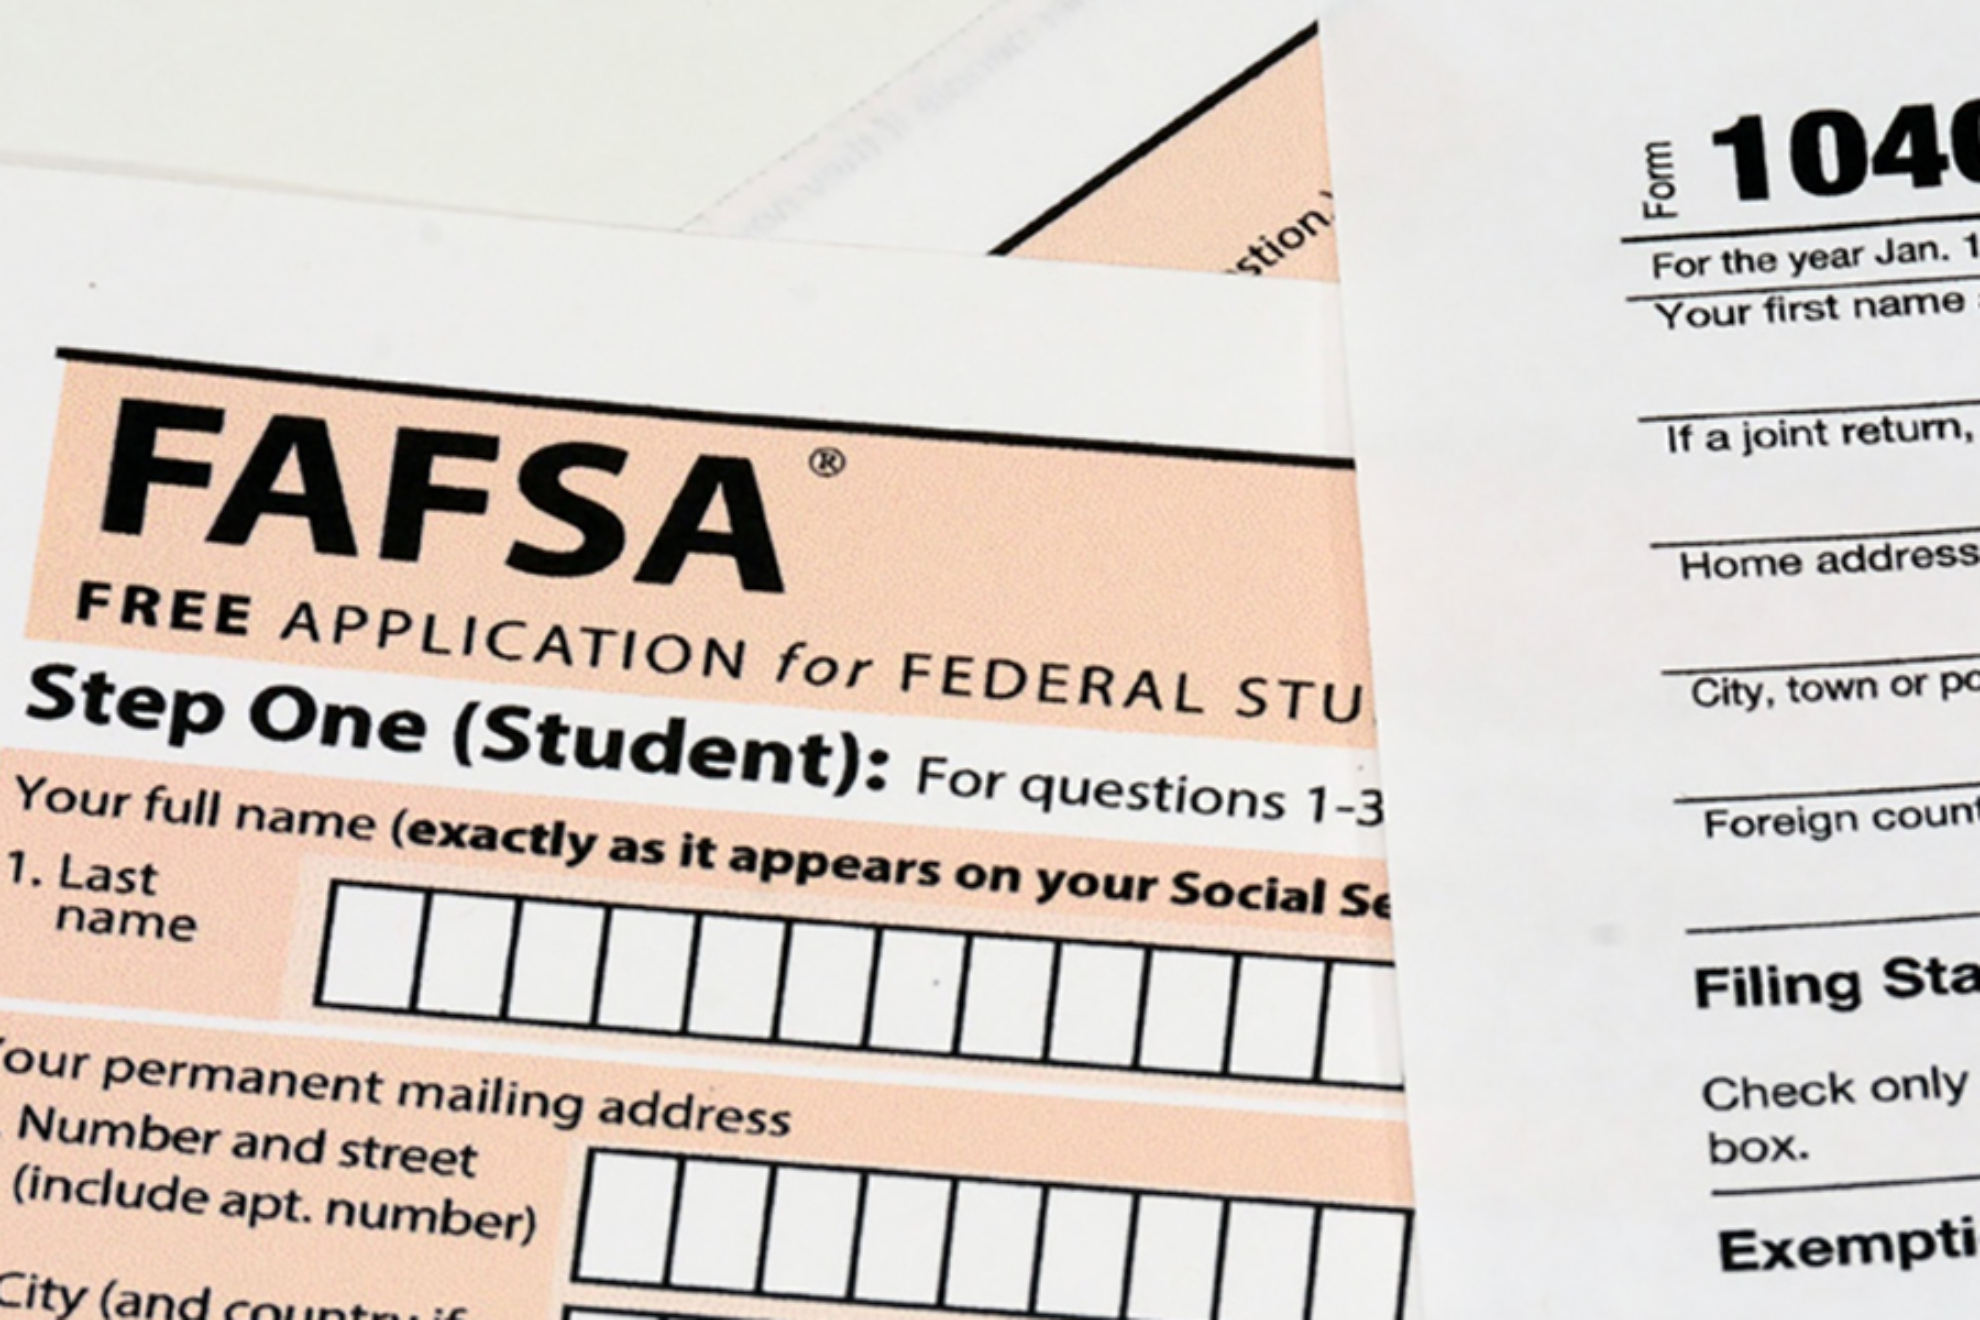 FAFSA Application: What is the most FAFSA will pay?